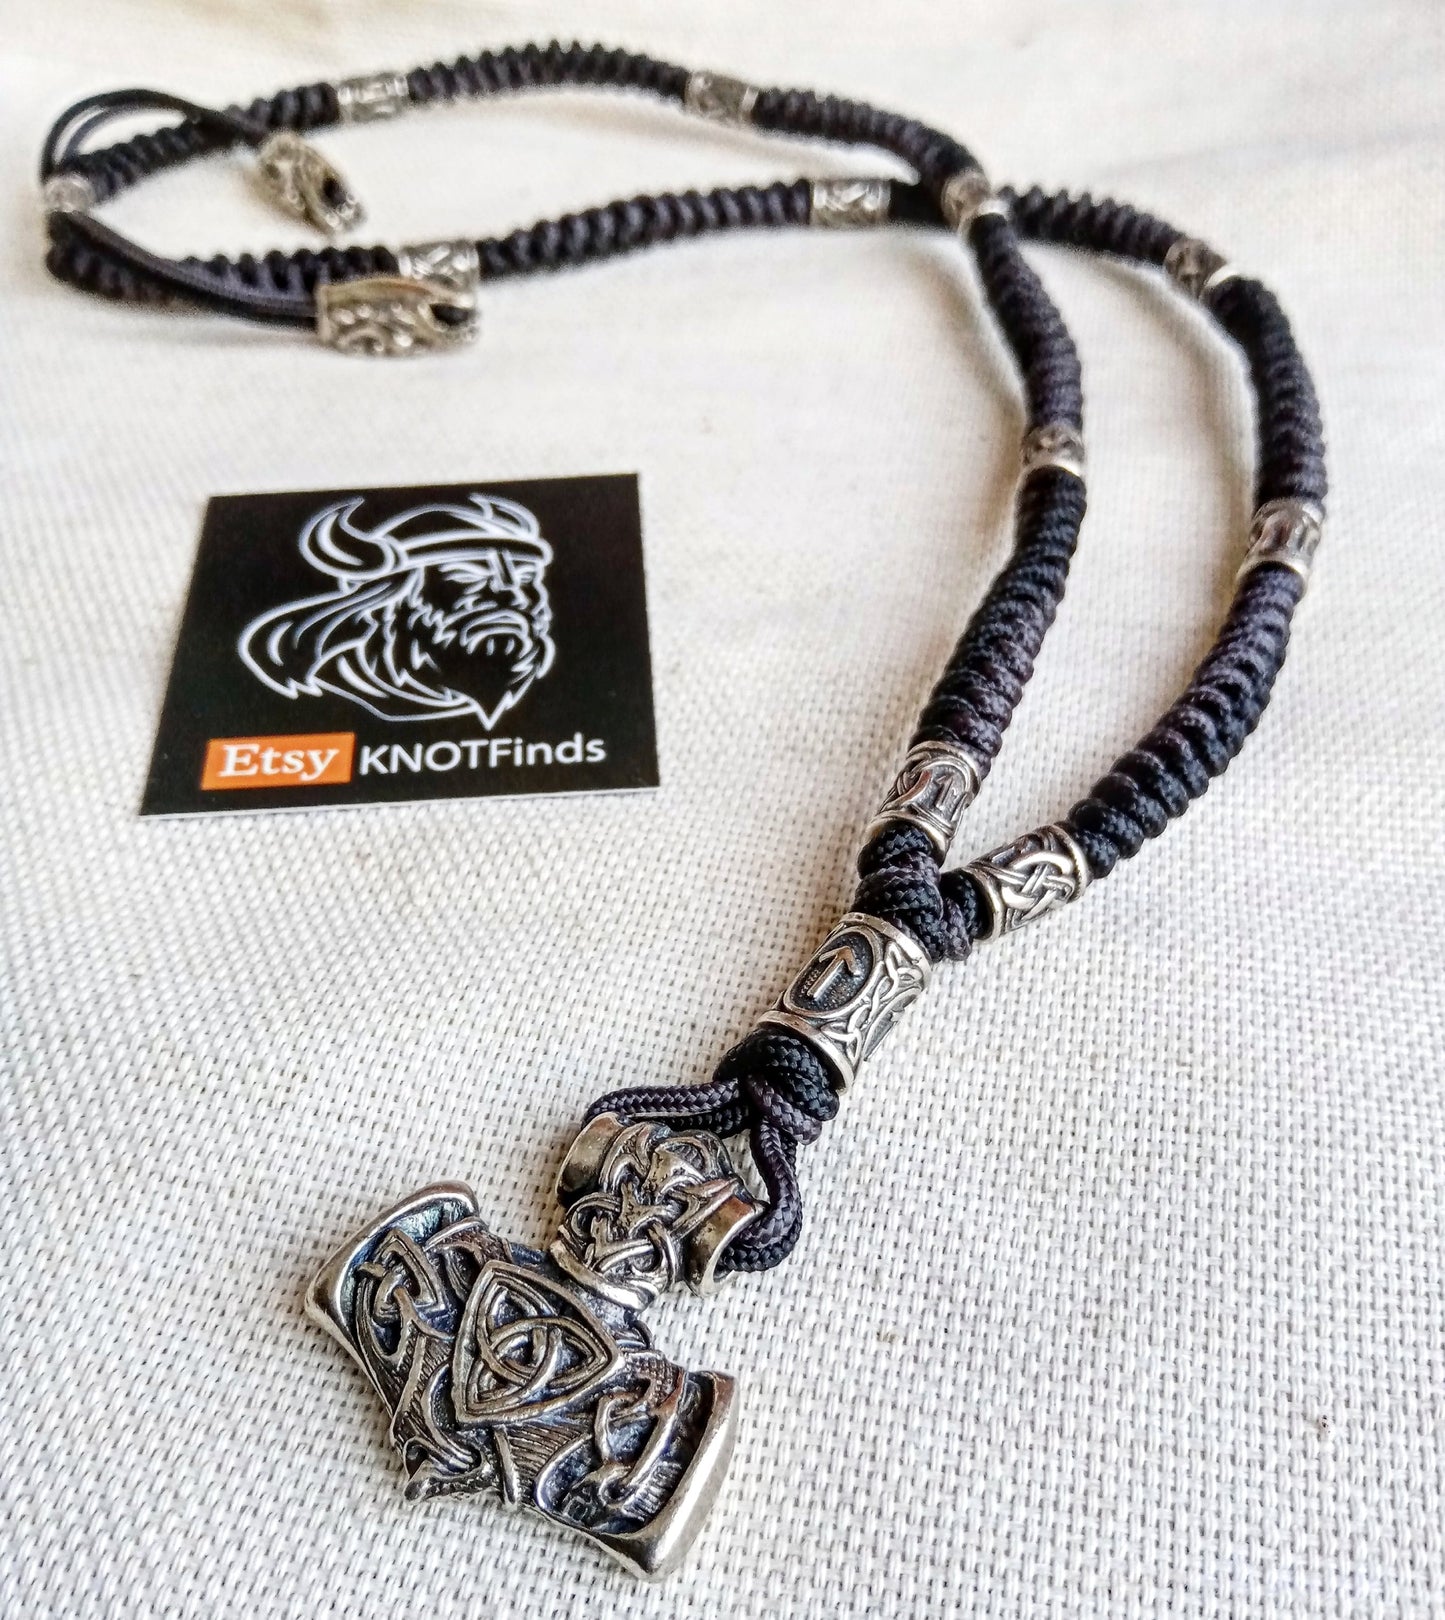 Necklace set. Runed beads, Thor's Hammer, black paracord 550. Set for weaving a necklace from paracord. DIY gift. Do it yourself.